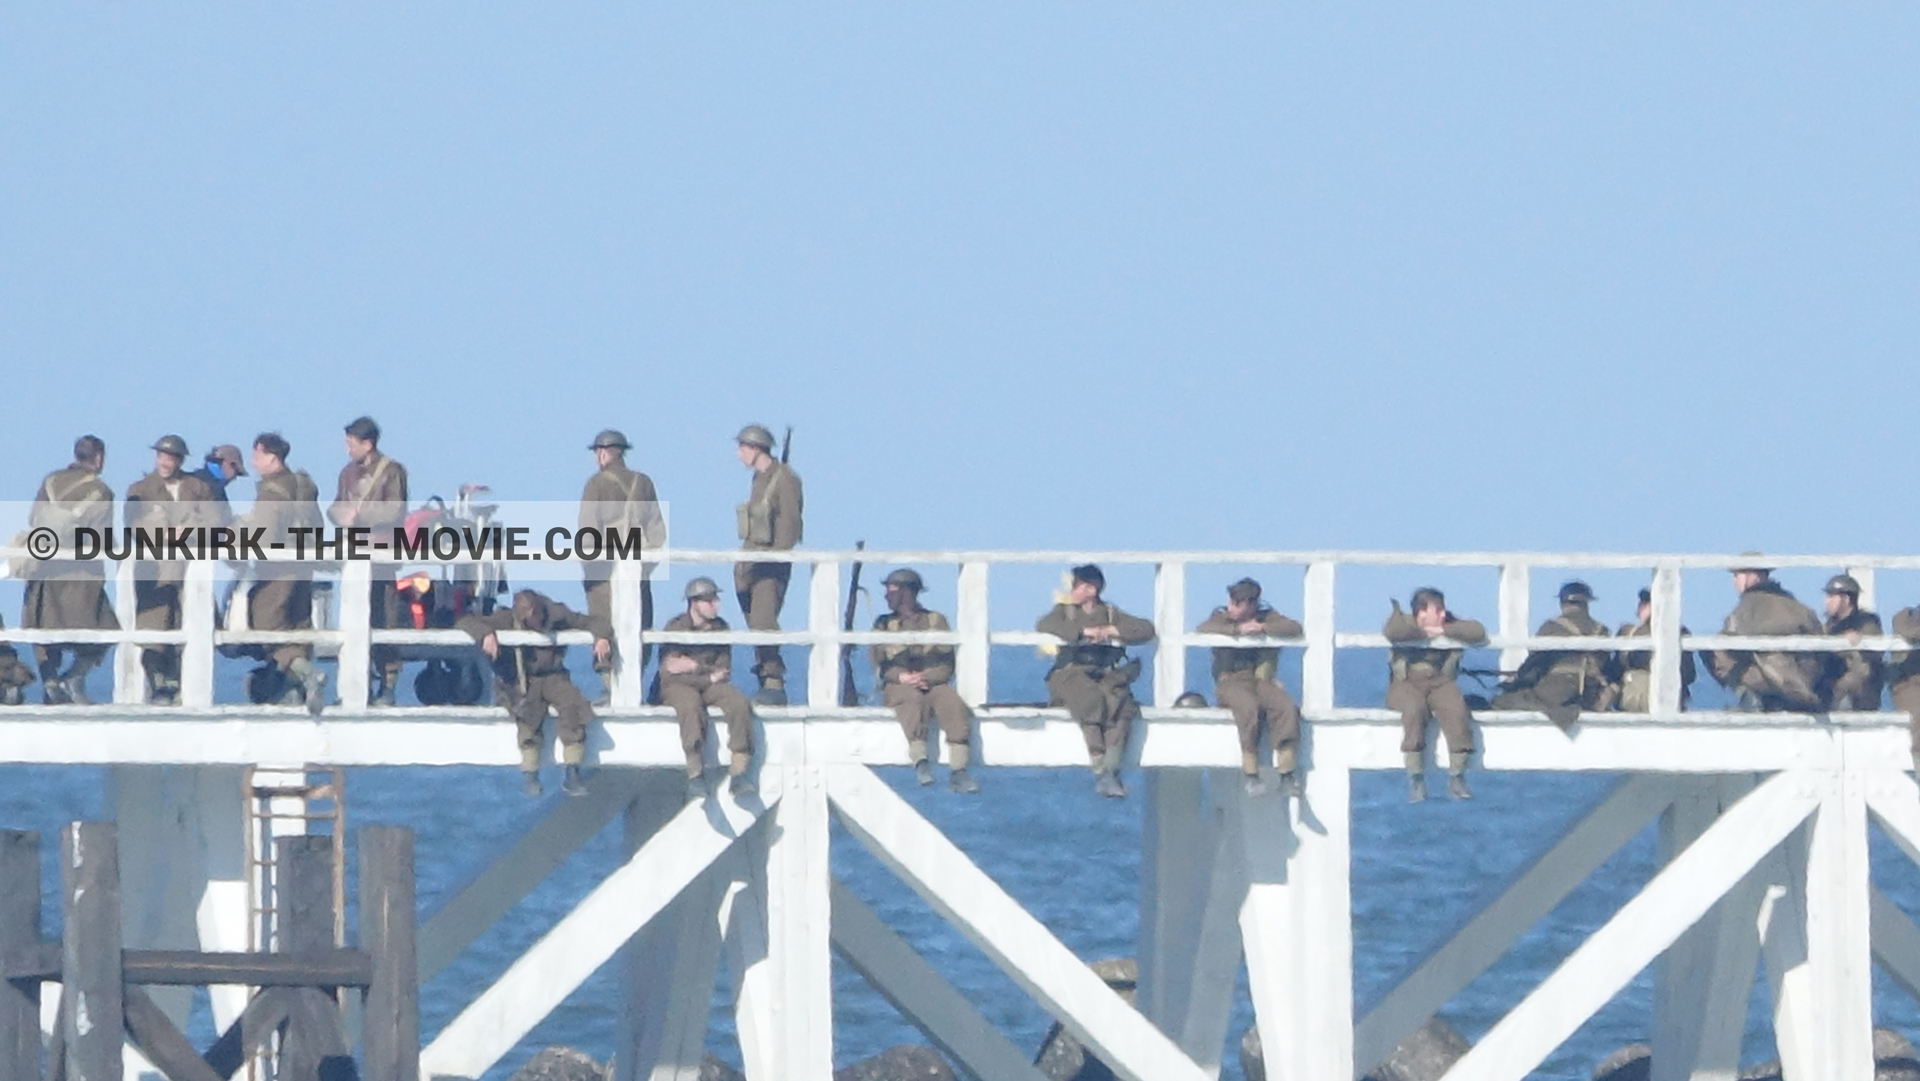 Picture with blue sky, supernumeraries, EST pier, technical team,  from behind the scene of the Dunkirk movie by Nolan